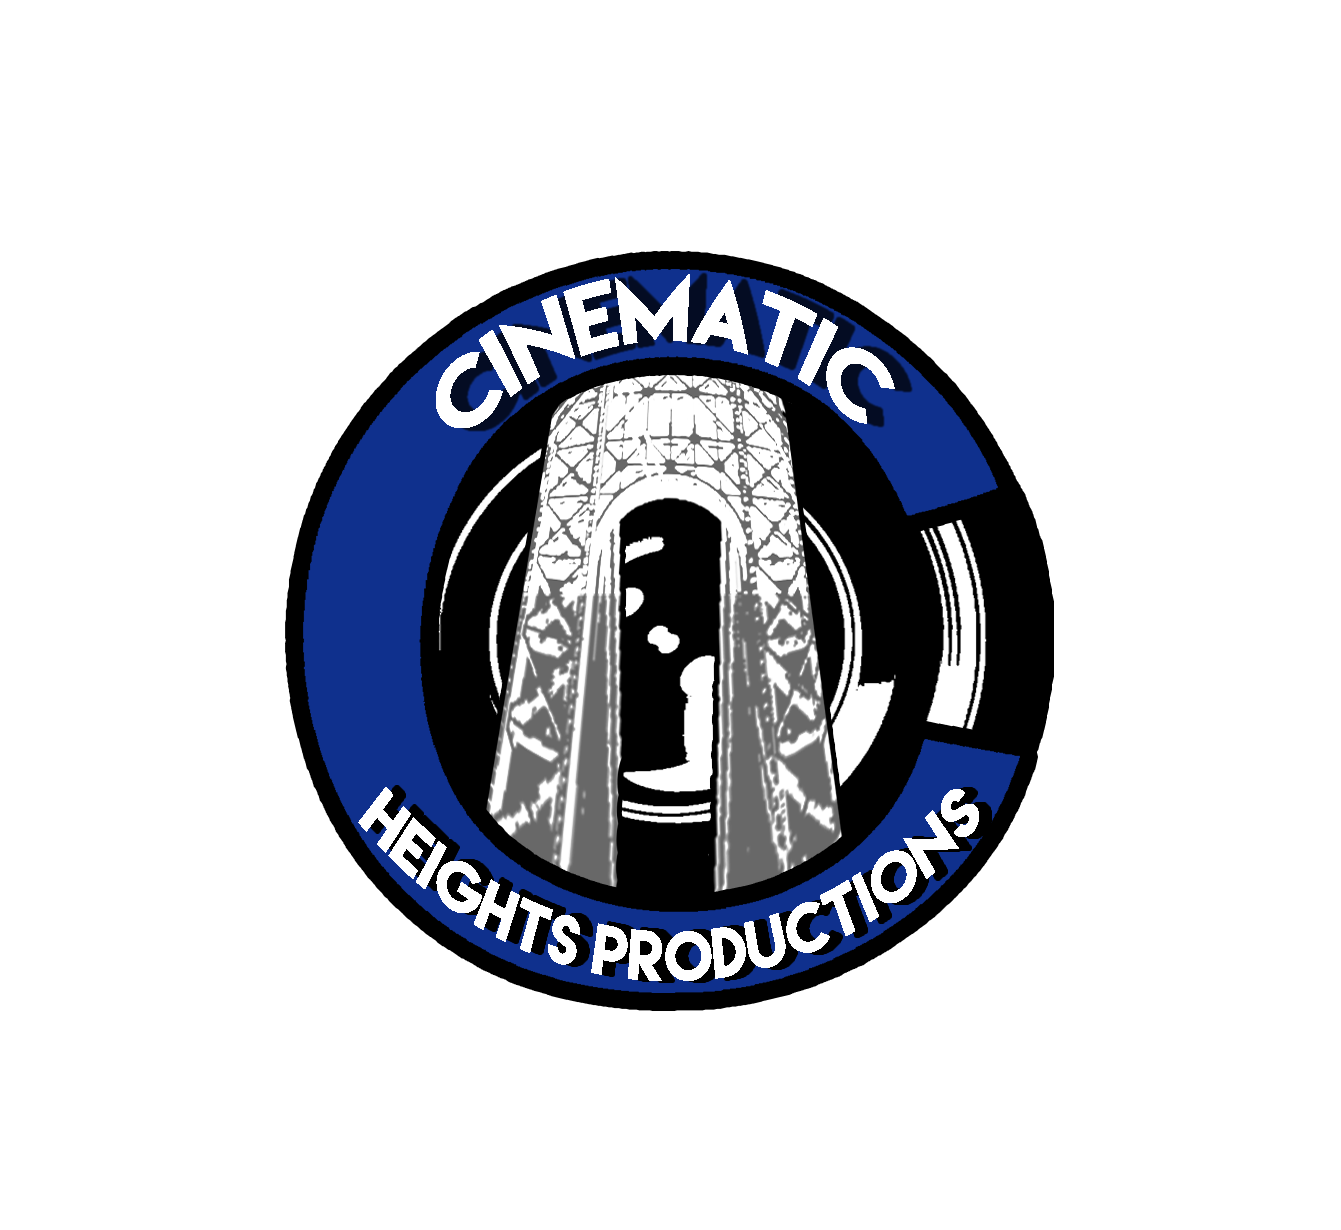 Cinematic Heights Productions